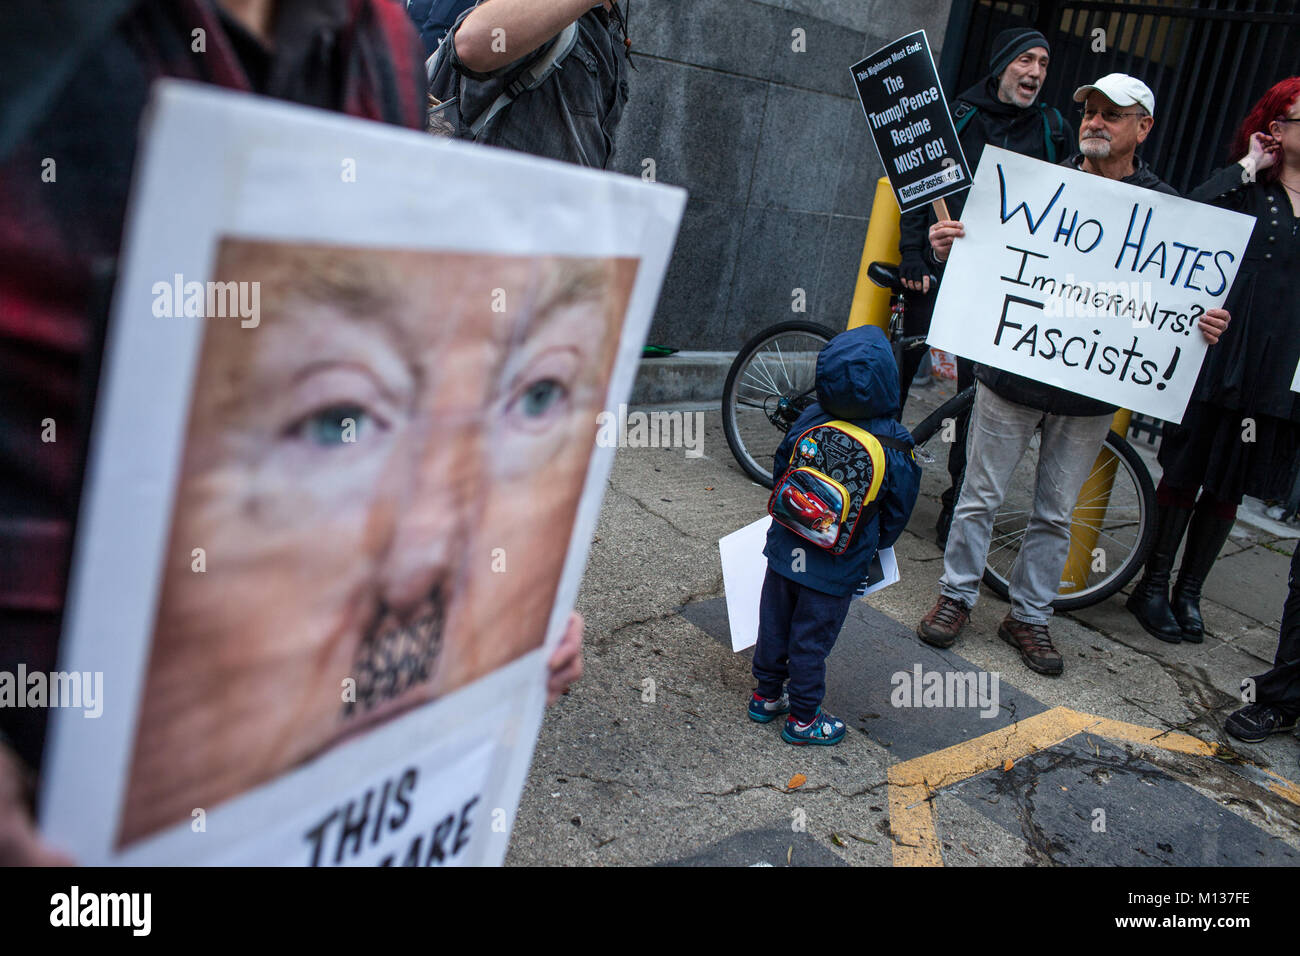 San Francisco, California, USA. 25th Jan, 2018. ALEXANDER RAMOS, 3, looks at BRUCE NEUBURGER, 70, as he holds a sign during a protest against immigration raids outside the Immigration and Customs Enforcement headquarters in downtown San Francisco, California. Credit: Joel Angel Juarez/ZUMA Wire/Alamy Live News Stock Photo